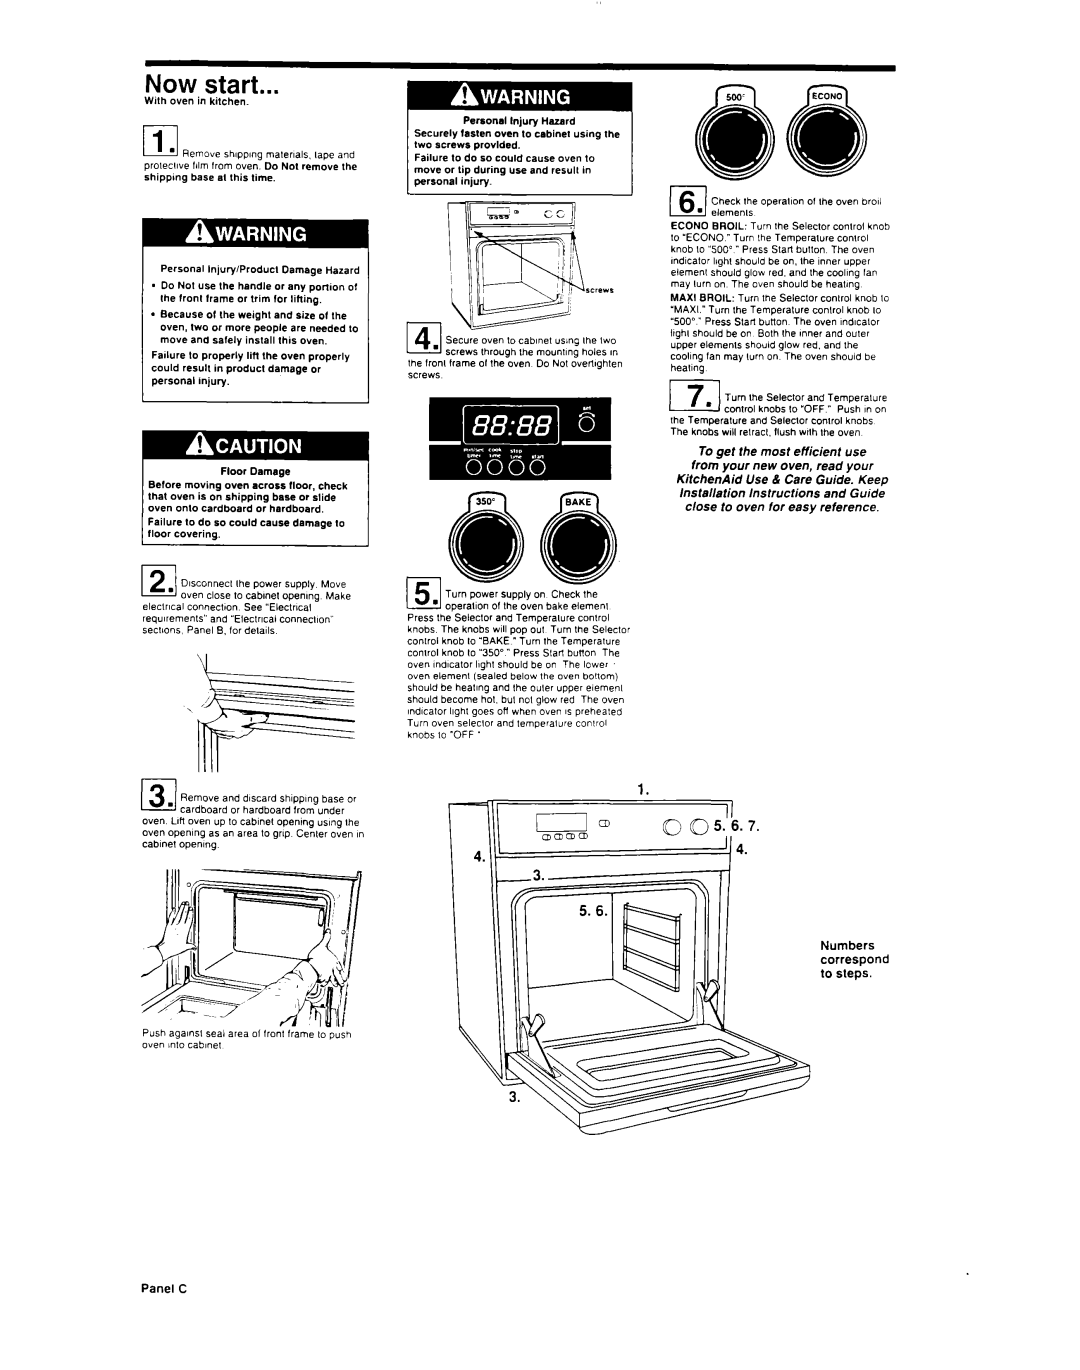 KitchenAid 4367501 Now start, installation Instructions and Guide close to oven for easy reference, Panel C 